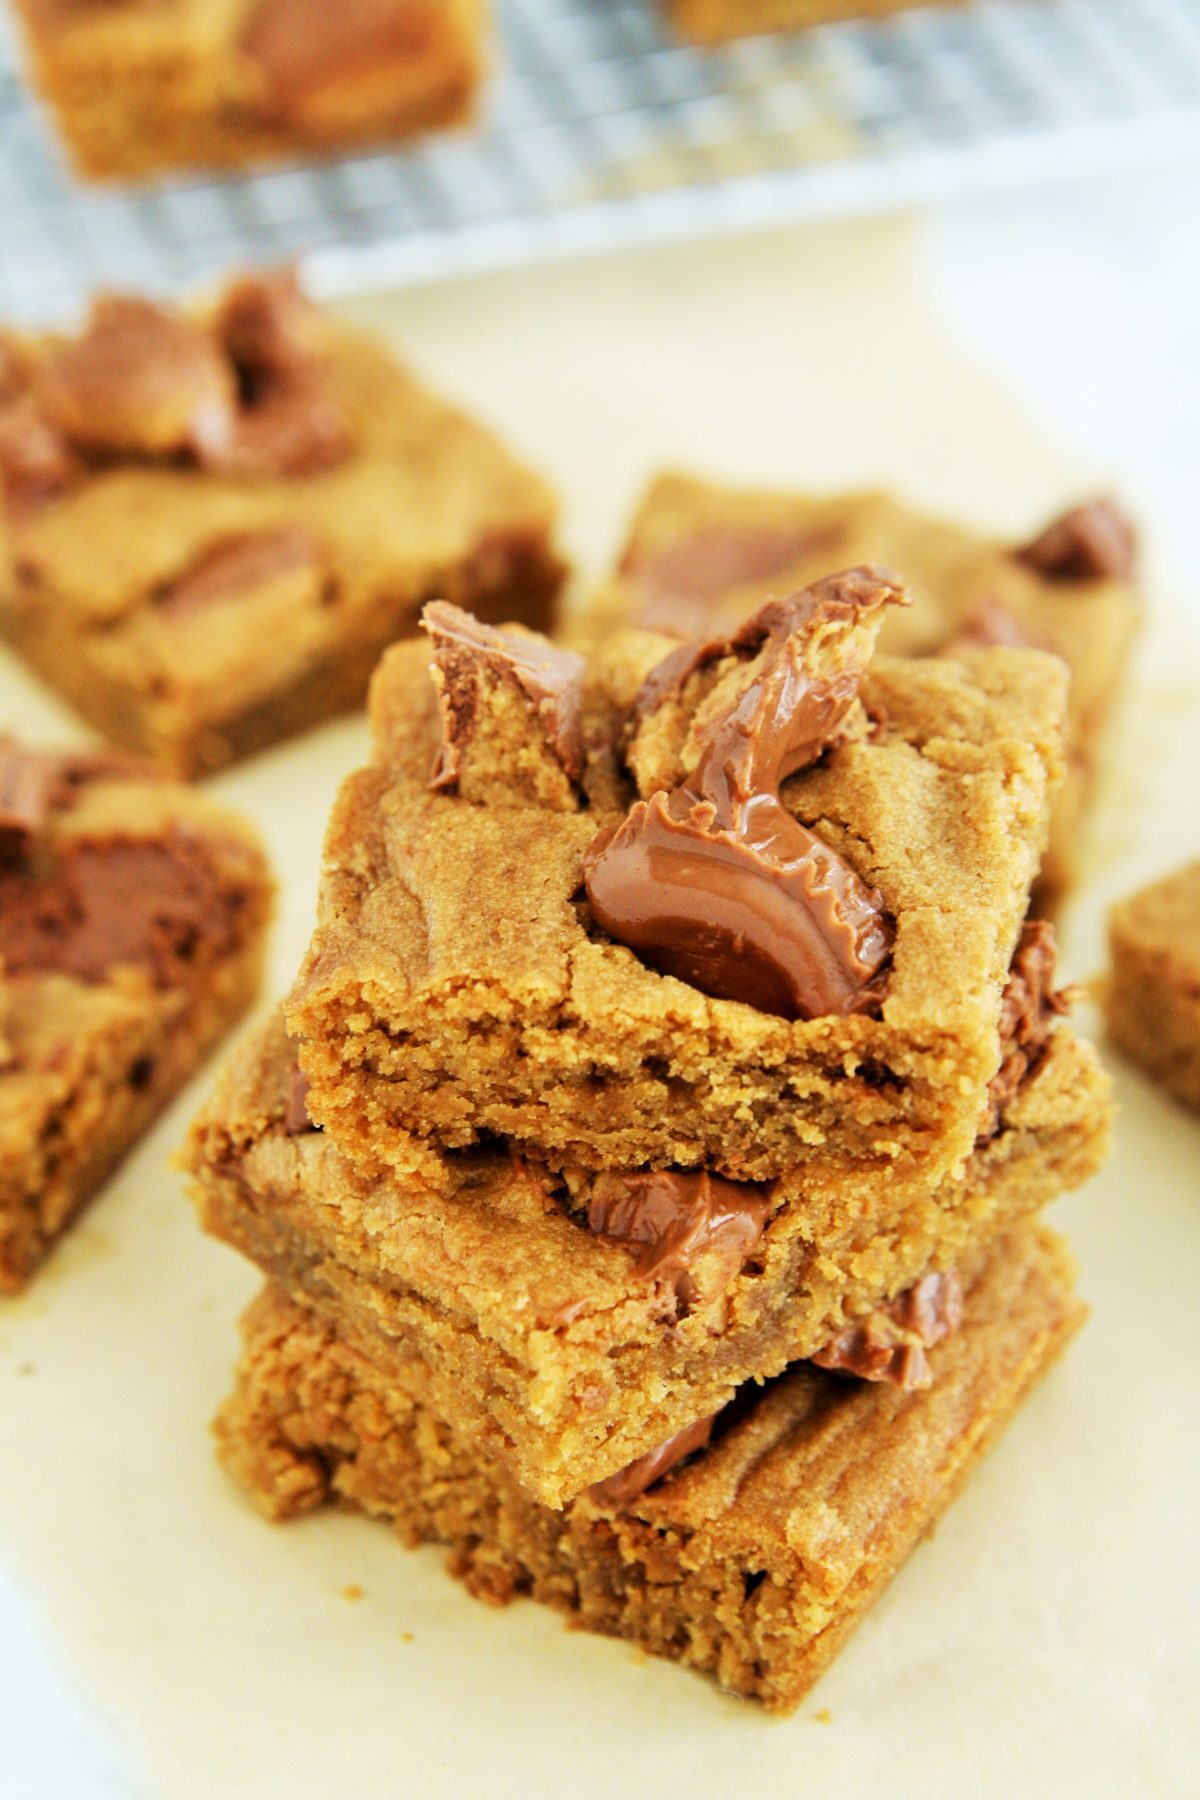 These soft and chewy blondies are bursting with the flavor of chocolate peanut butter cup, perfect treat for pairing with coffee.